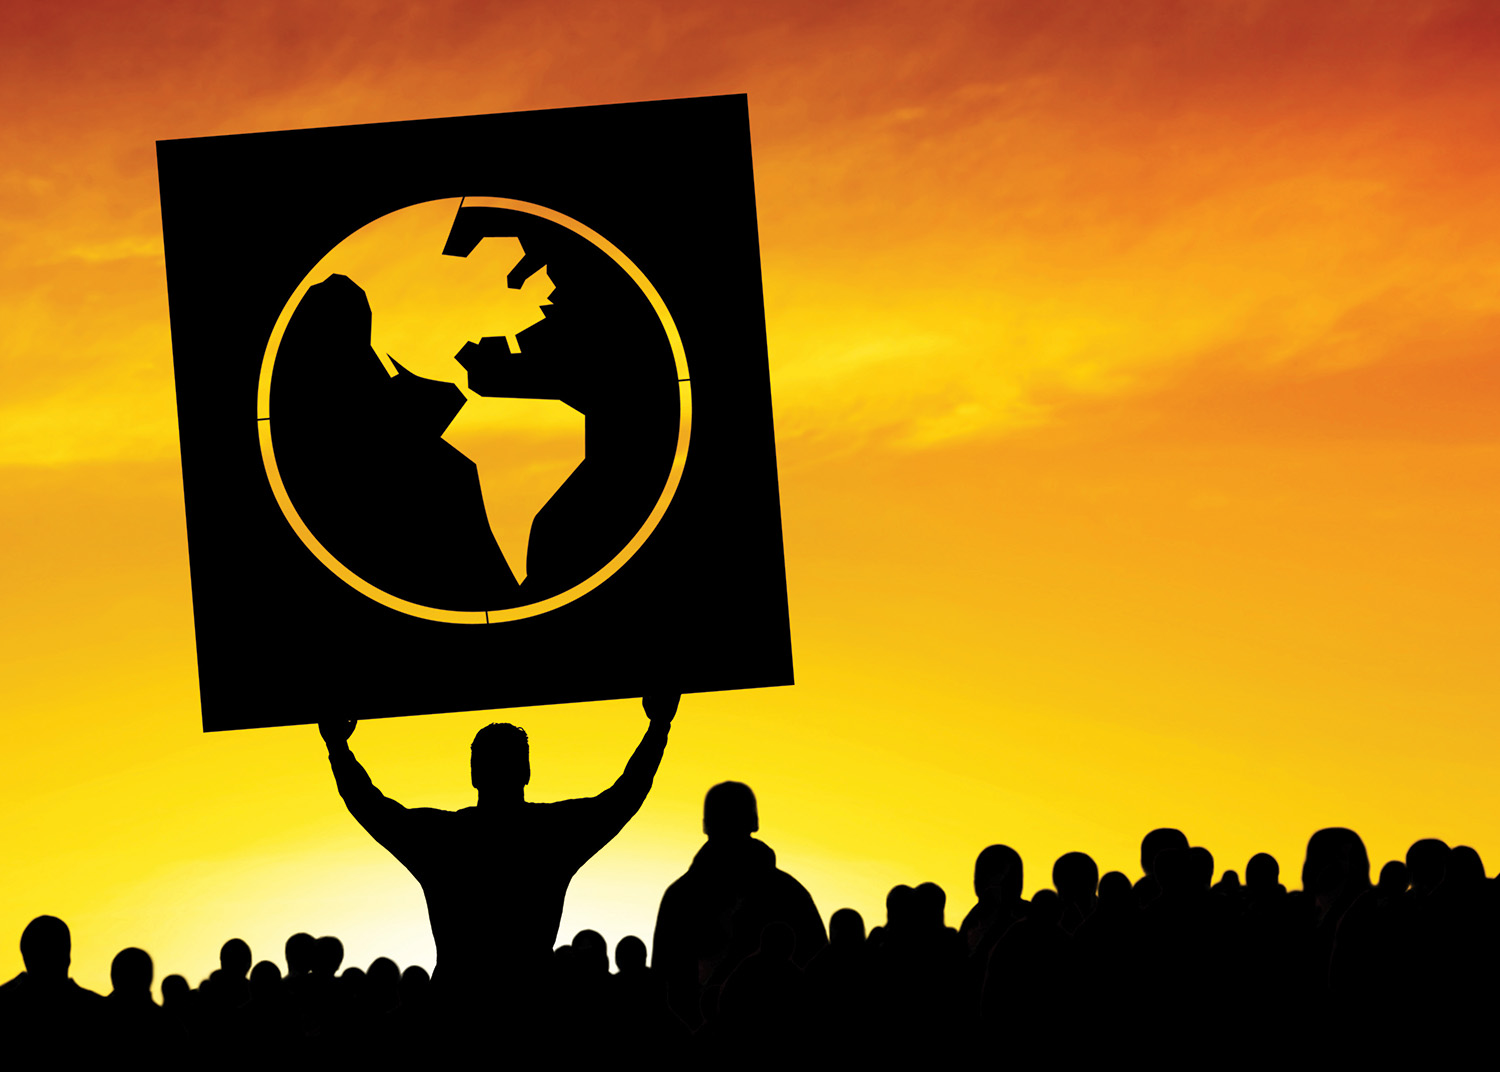 A silhouette of people with one individual holding up a sign that shows the Western Hemisphere.